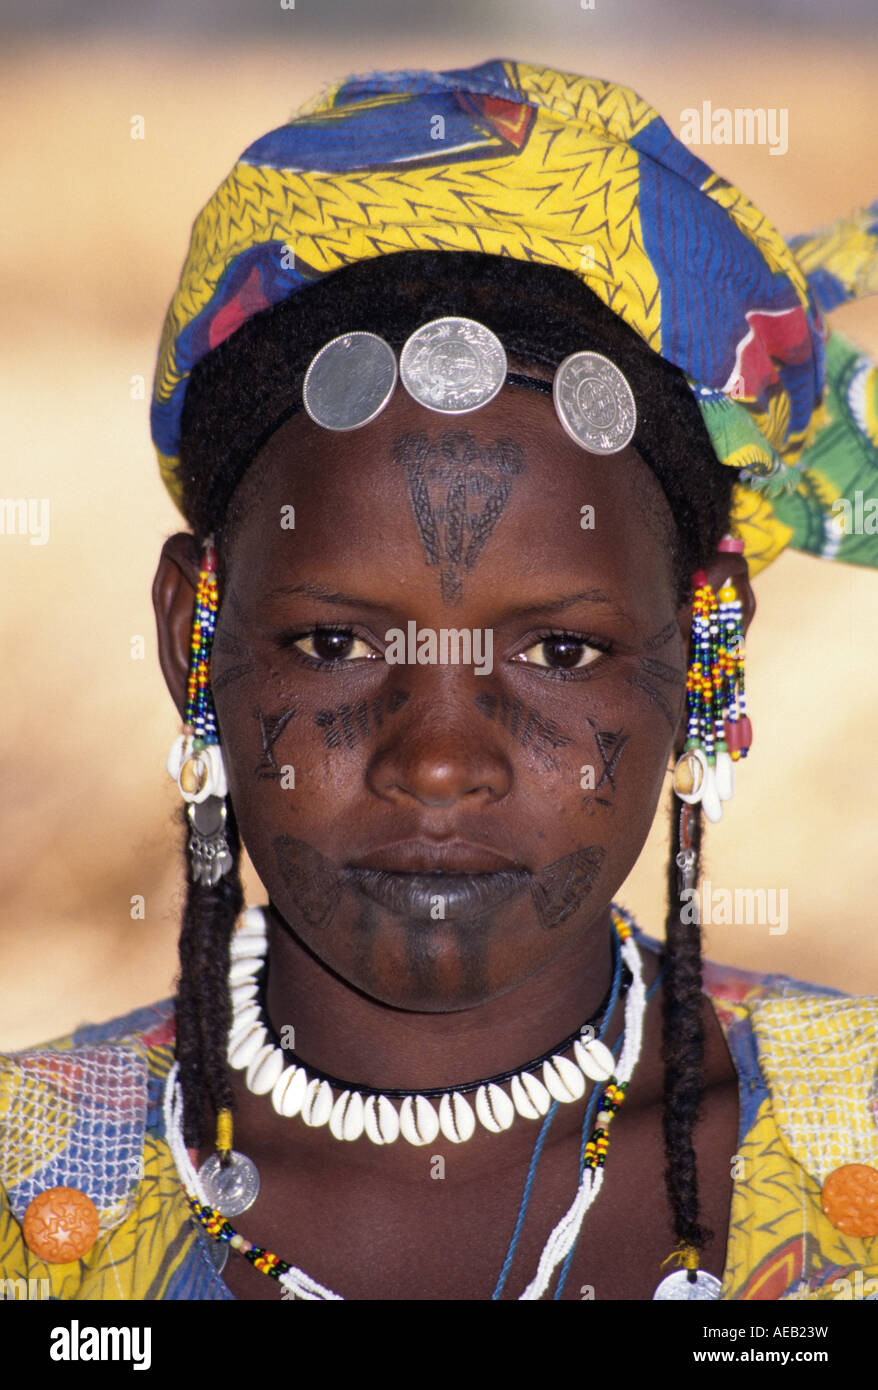 Delaquara, Niger. Fulani Girl with Facial Tattoos, Jewelry, Cowrie Shell Necklace Stock Photo